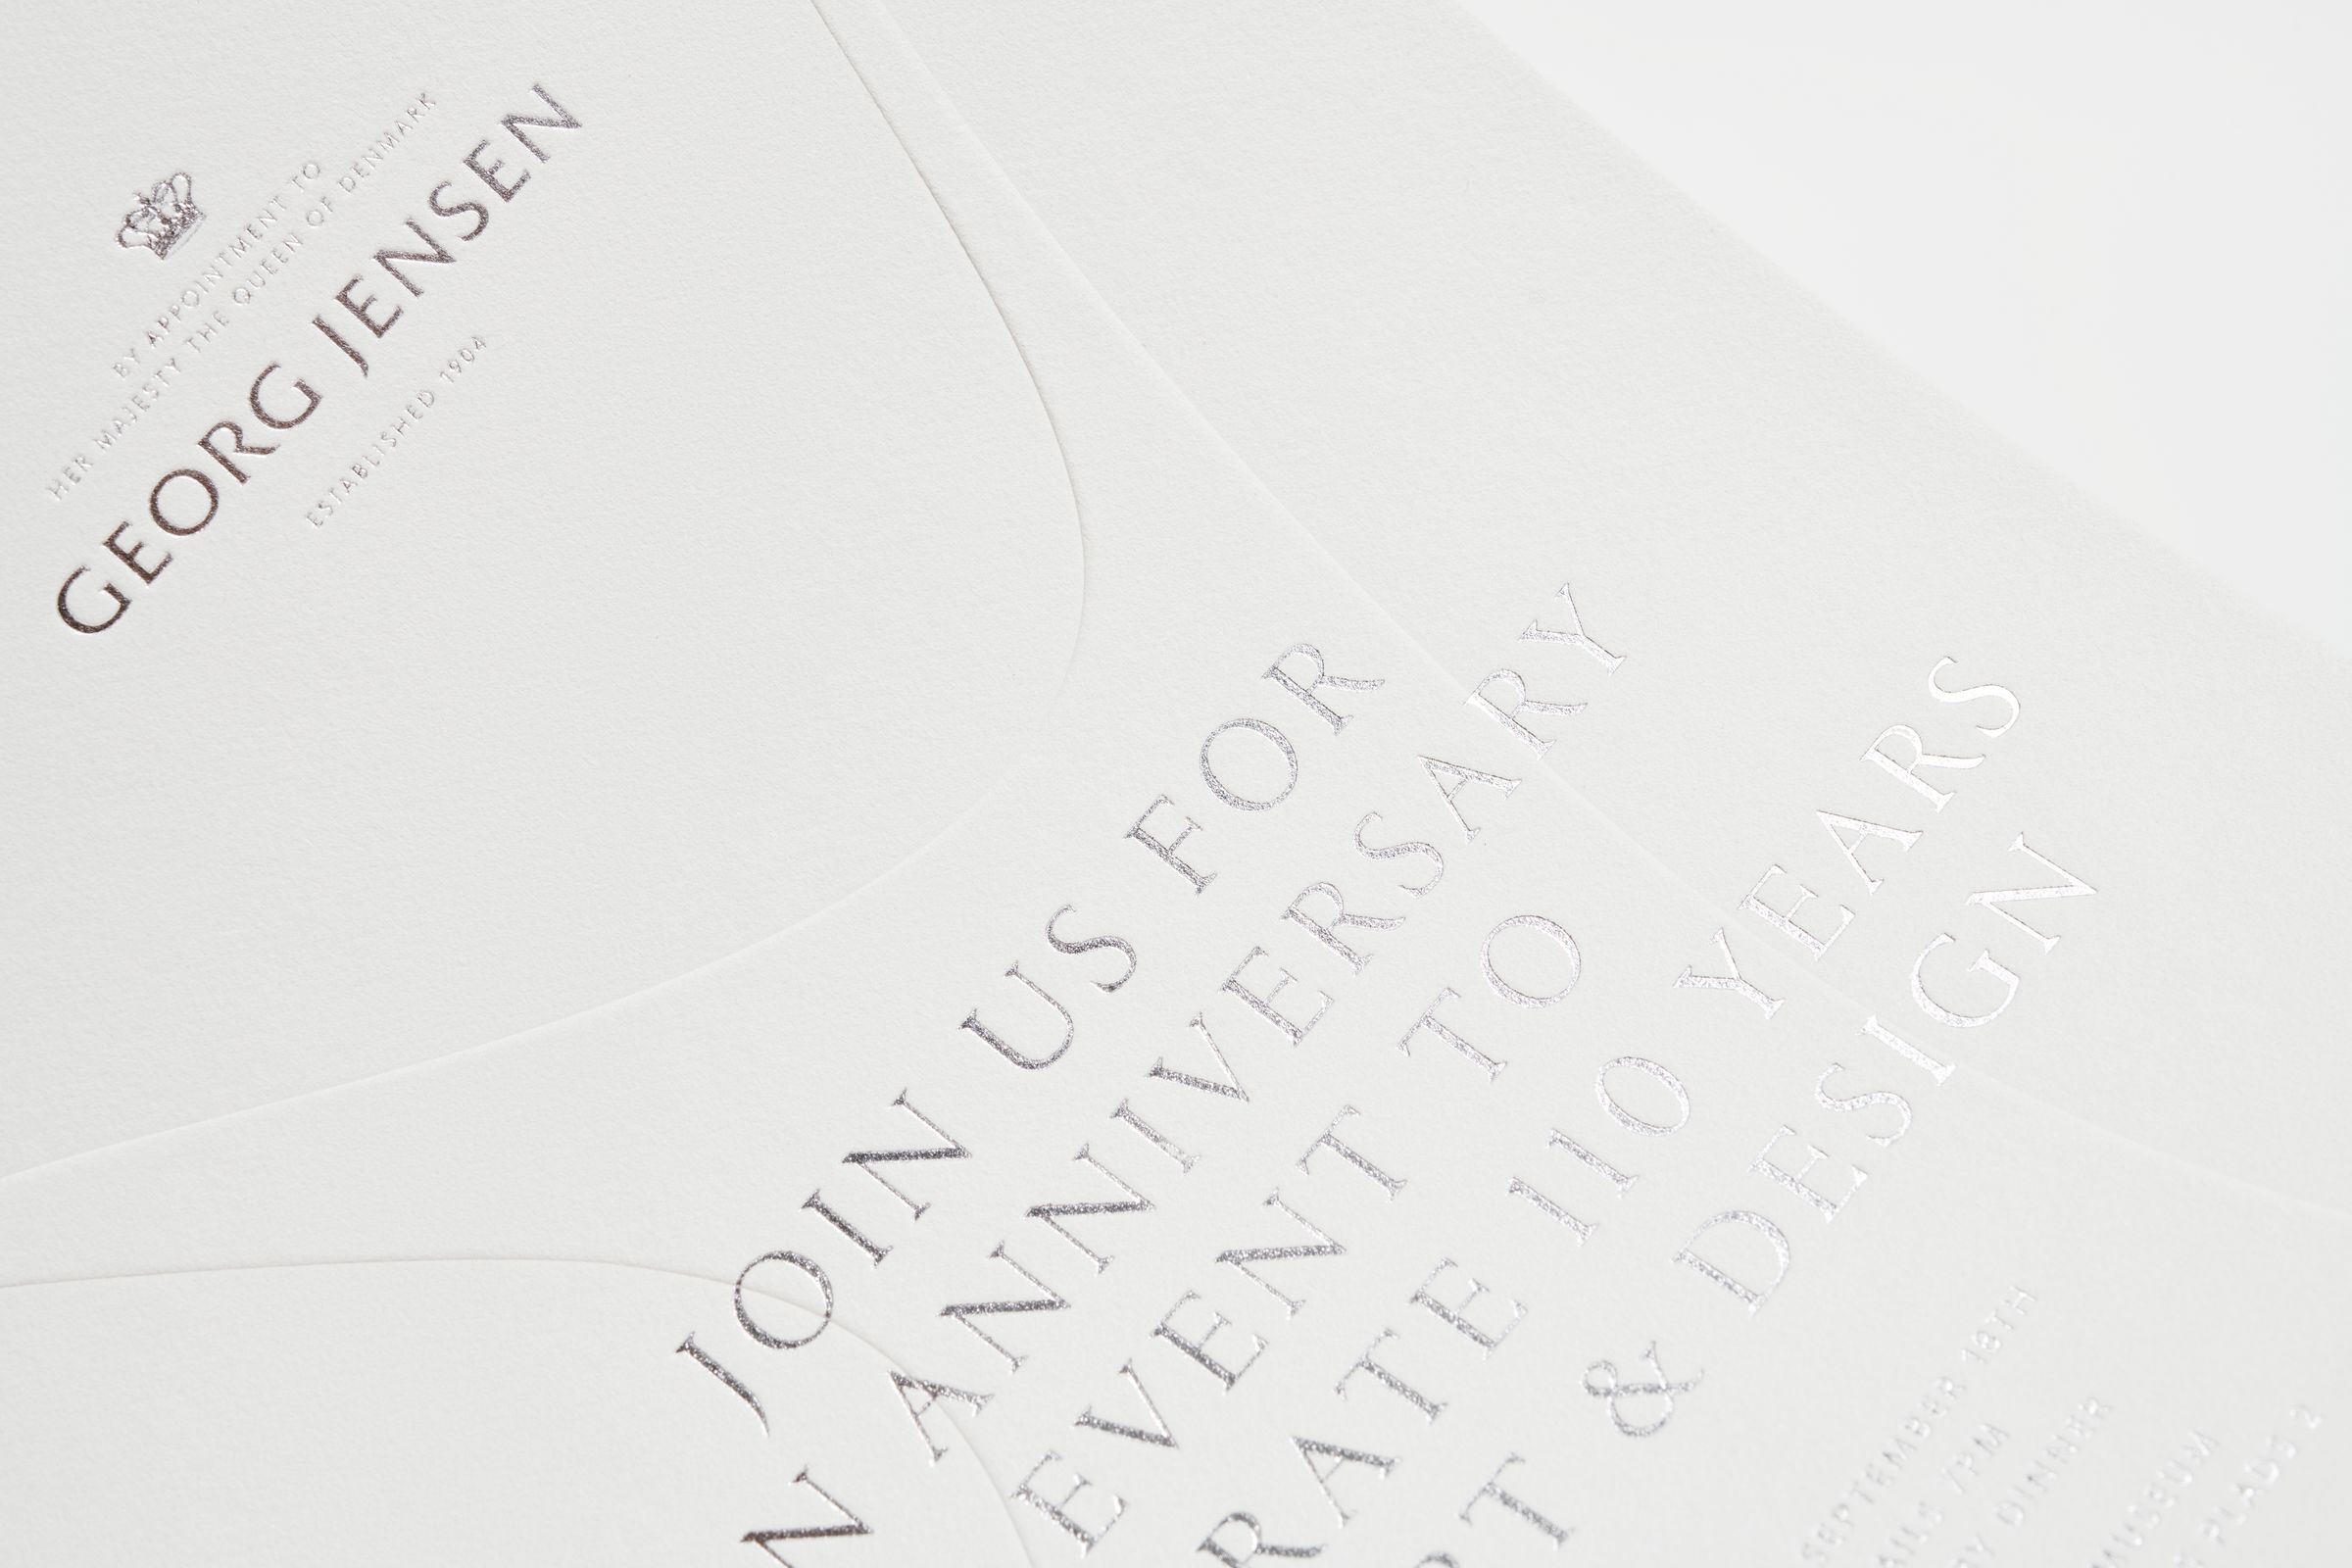 Detail of Georg Jensen invitation with silver foil and blind embossing